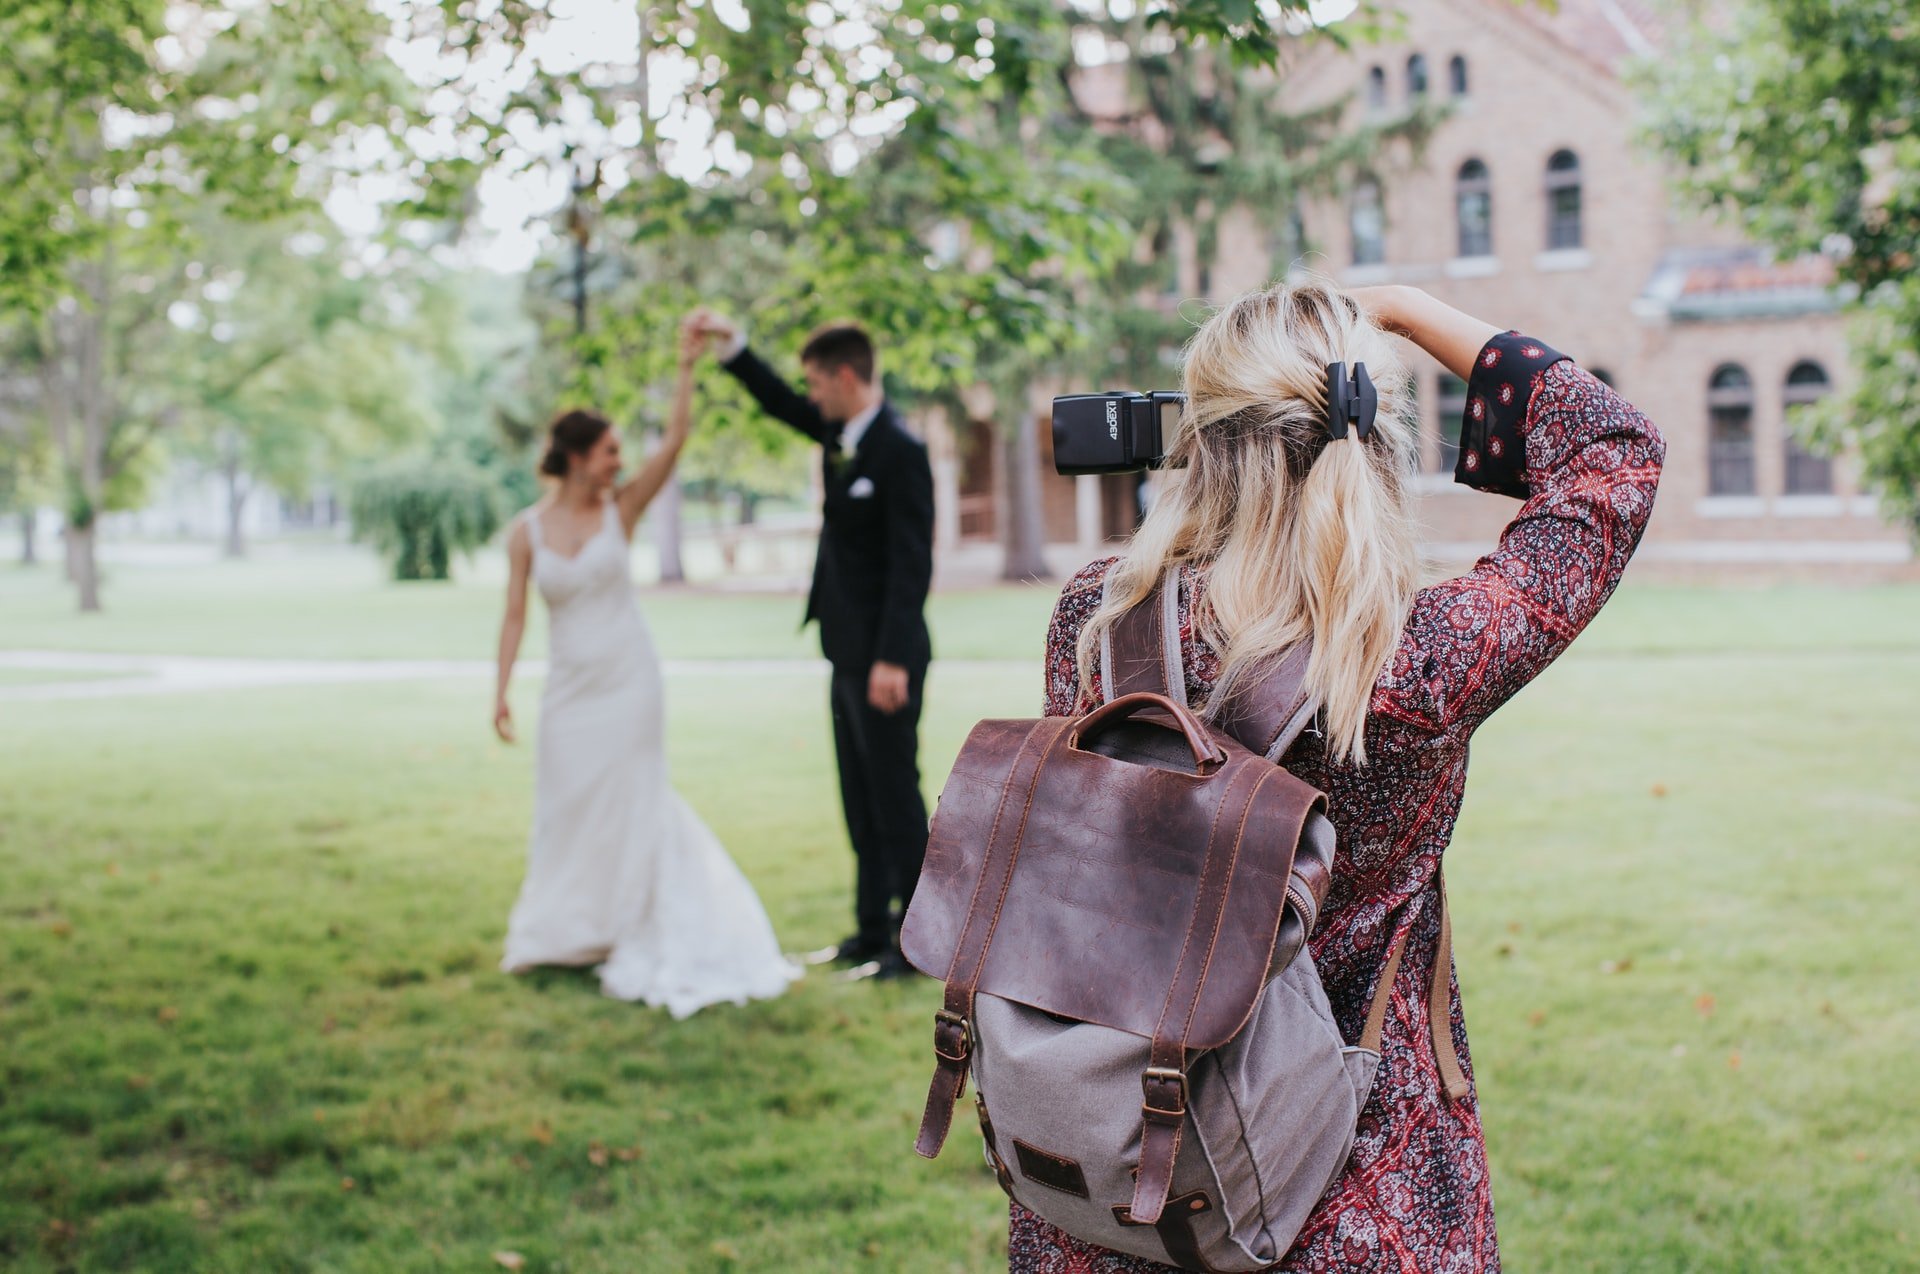 She took photos of the bride and groom | Source: Unsplash